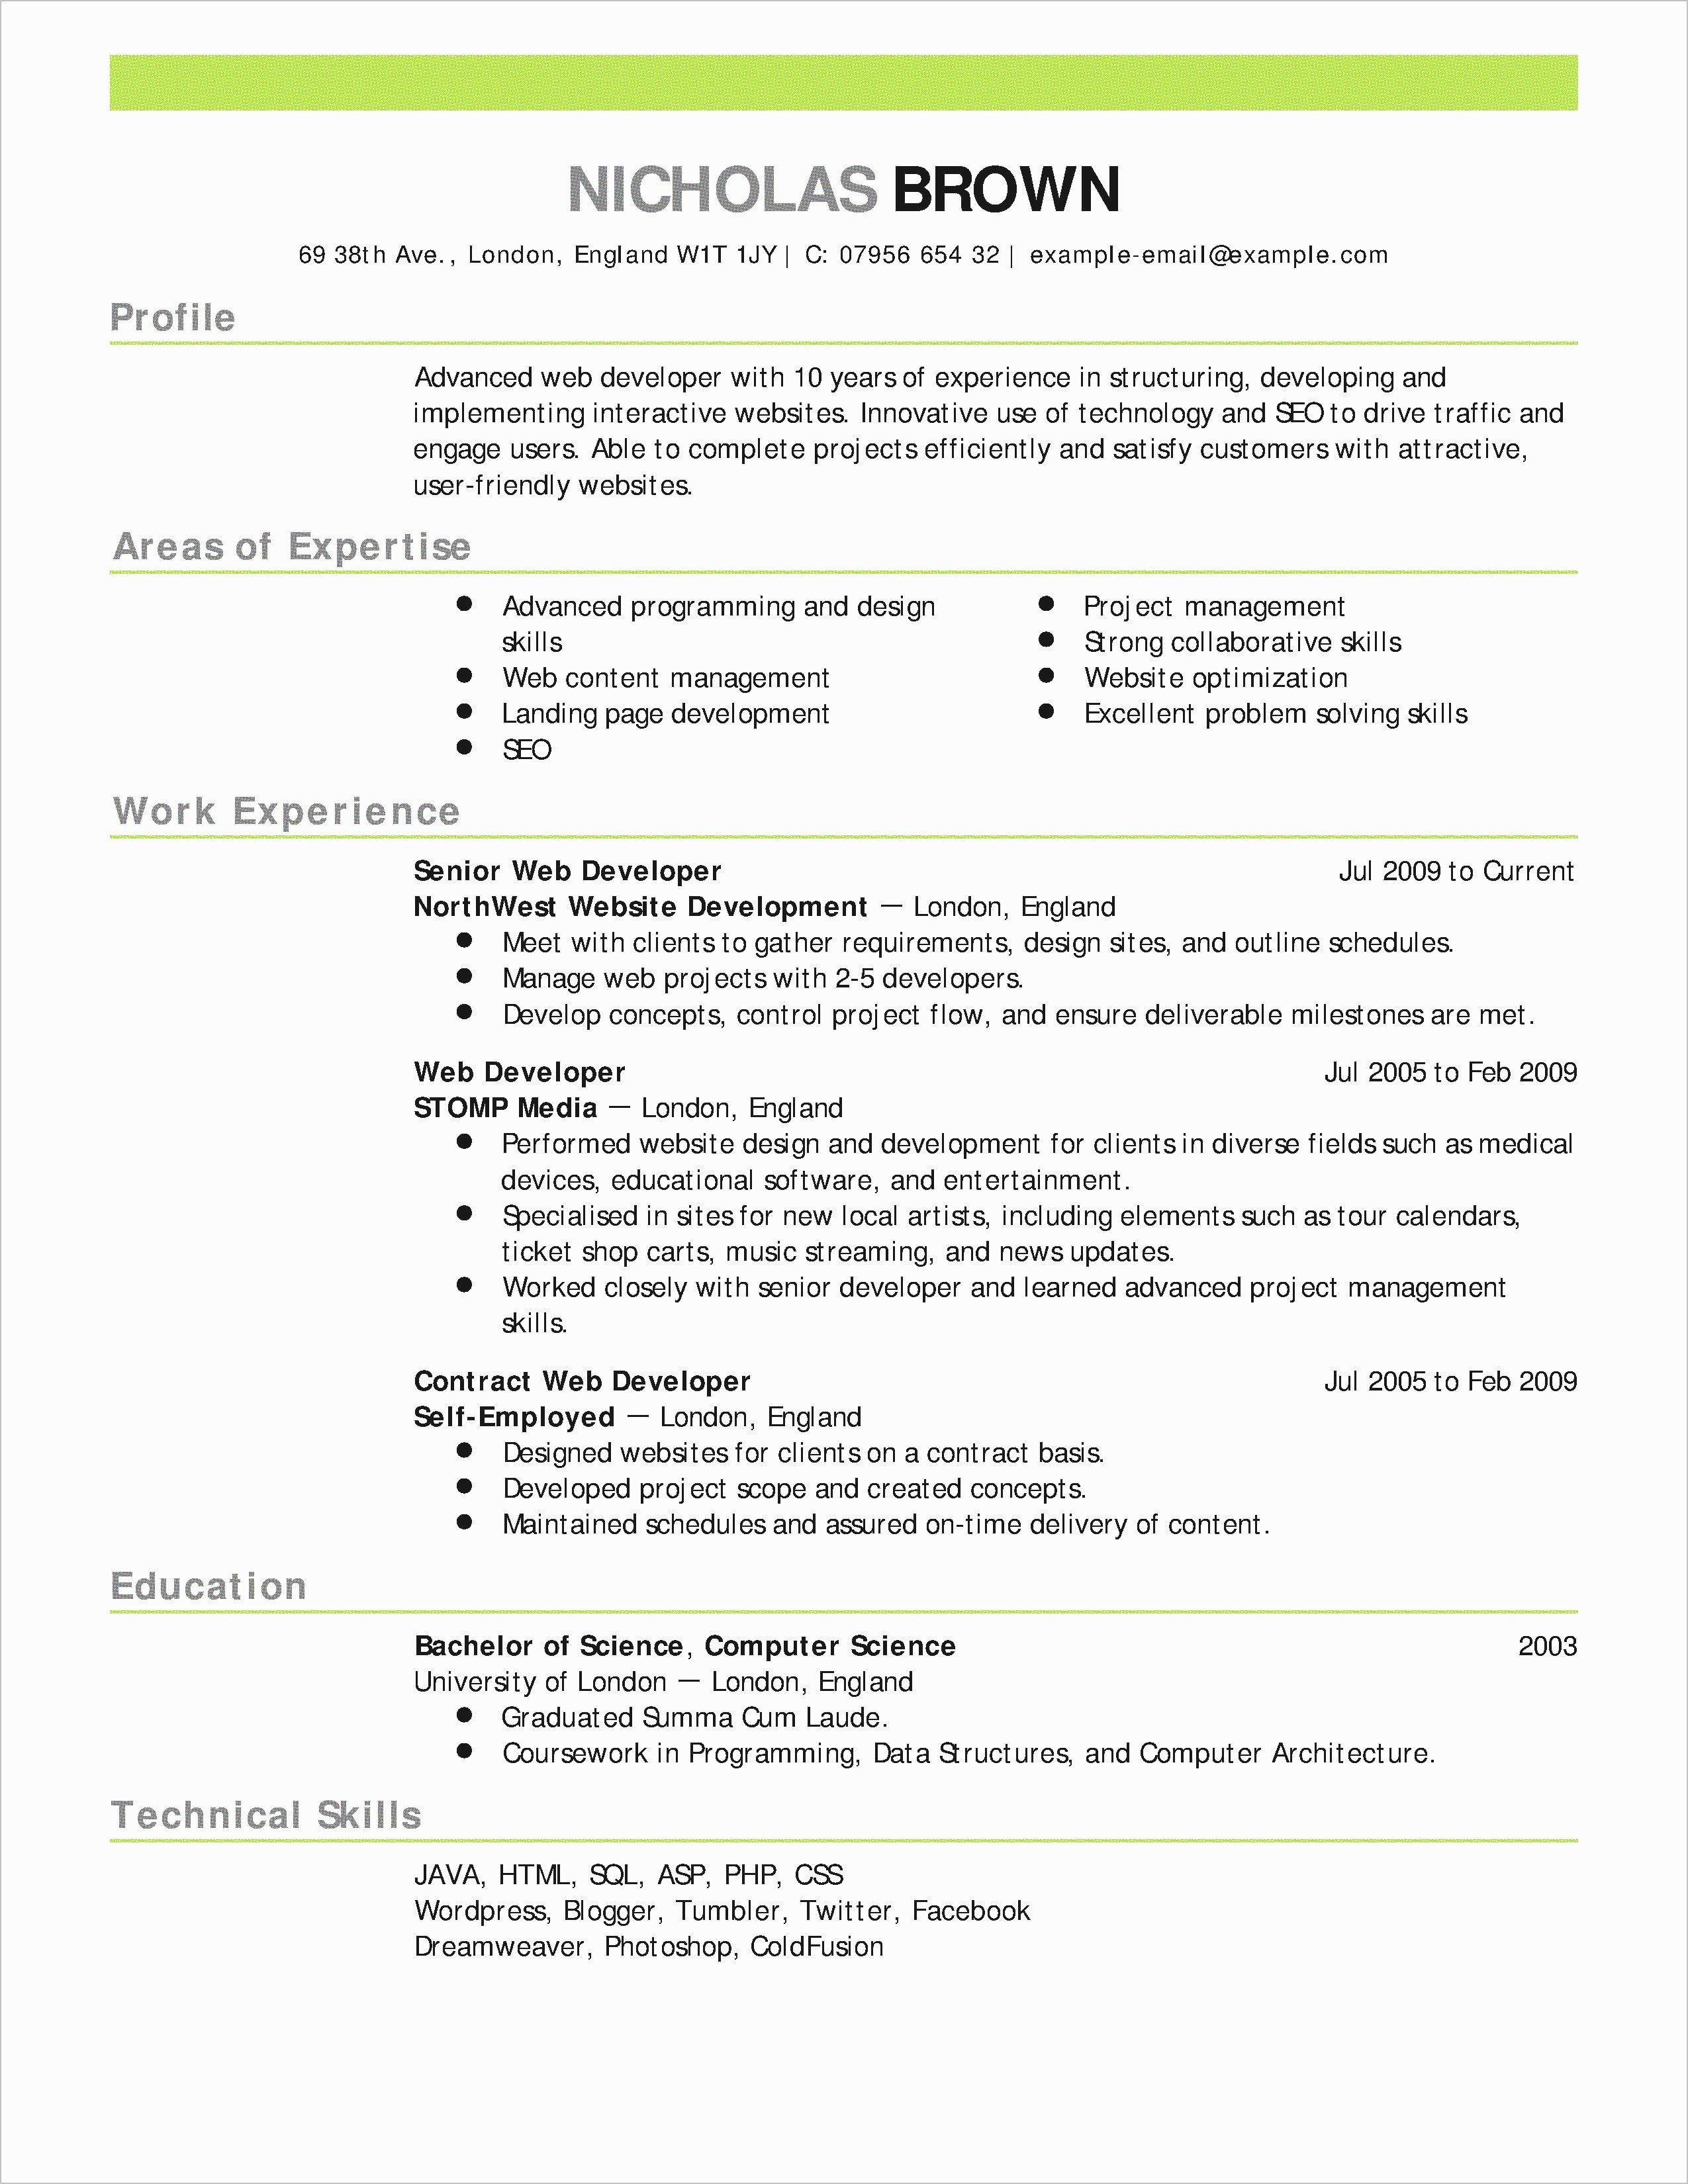 Best Place to Post Resume New Elegant Cover Letter Writing